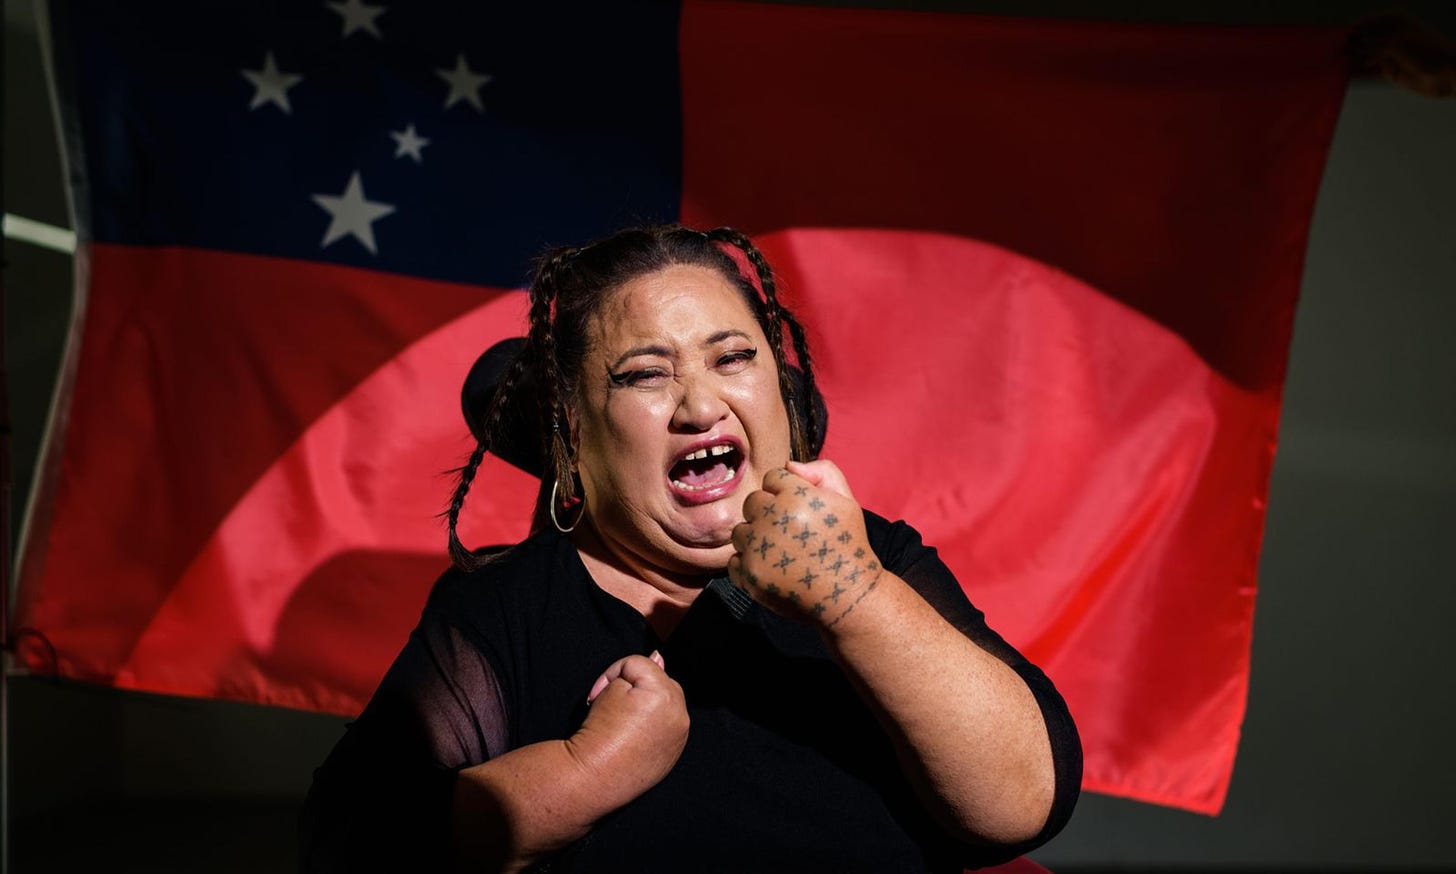 A disabled femme using a powerchair is mid-cry under a spotlight with raised fists against the Samoan flag.